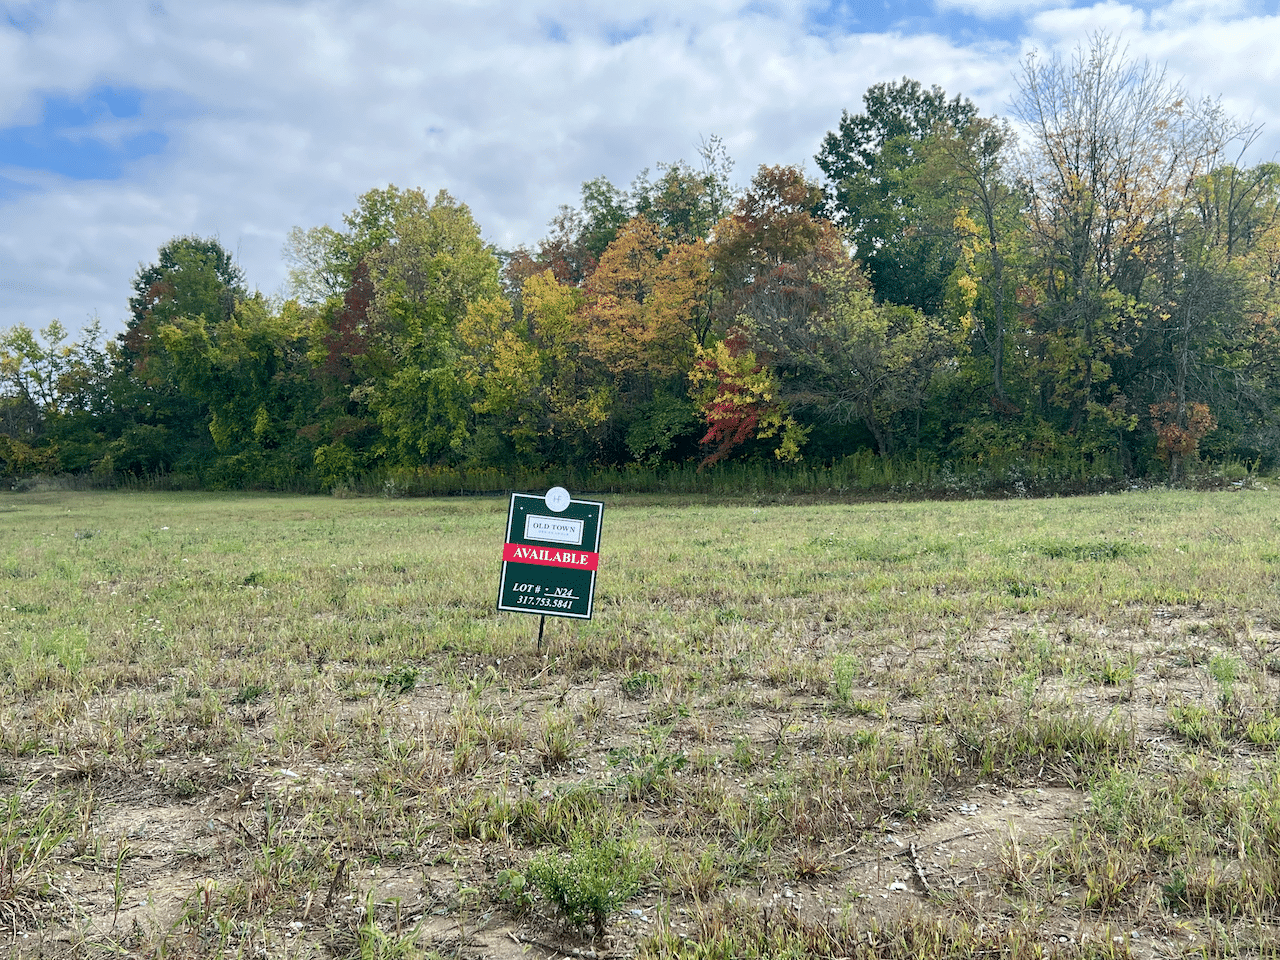 An empty field with a sign advertising new homes for sale in Carmel, Indiana.